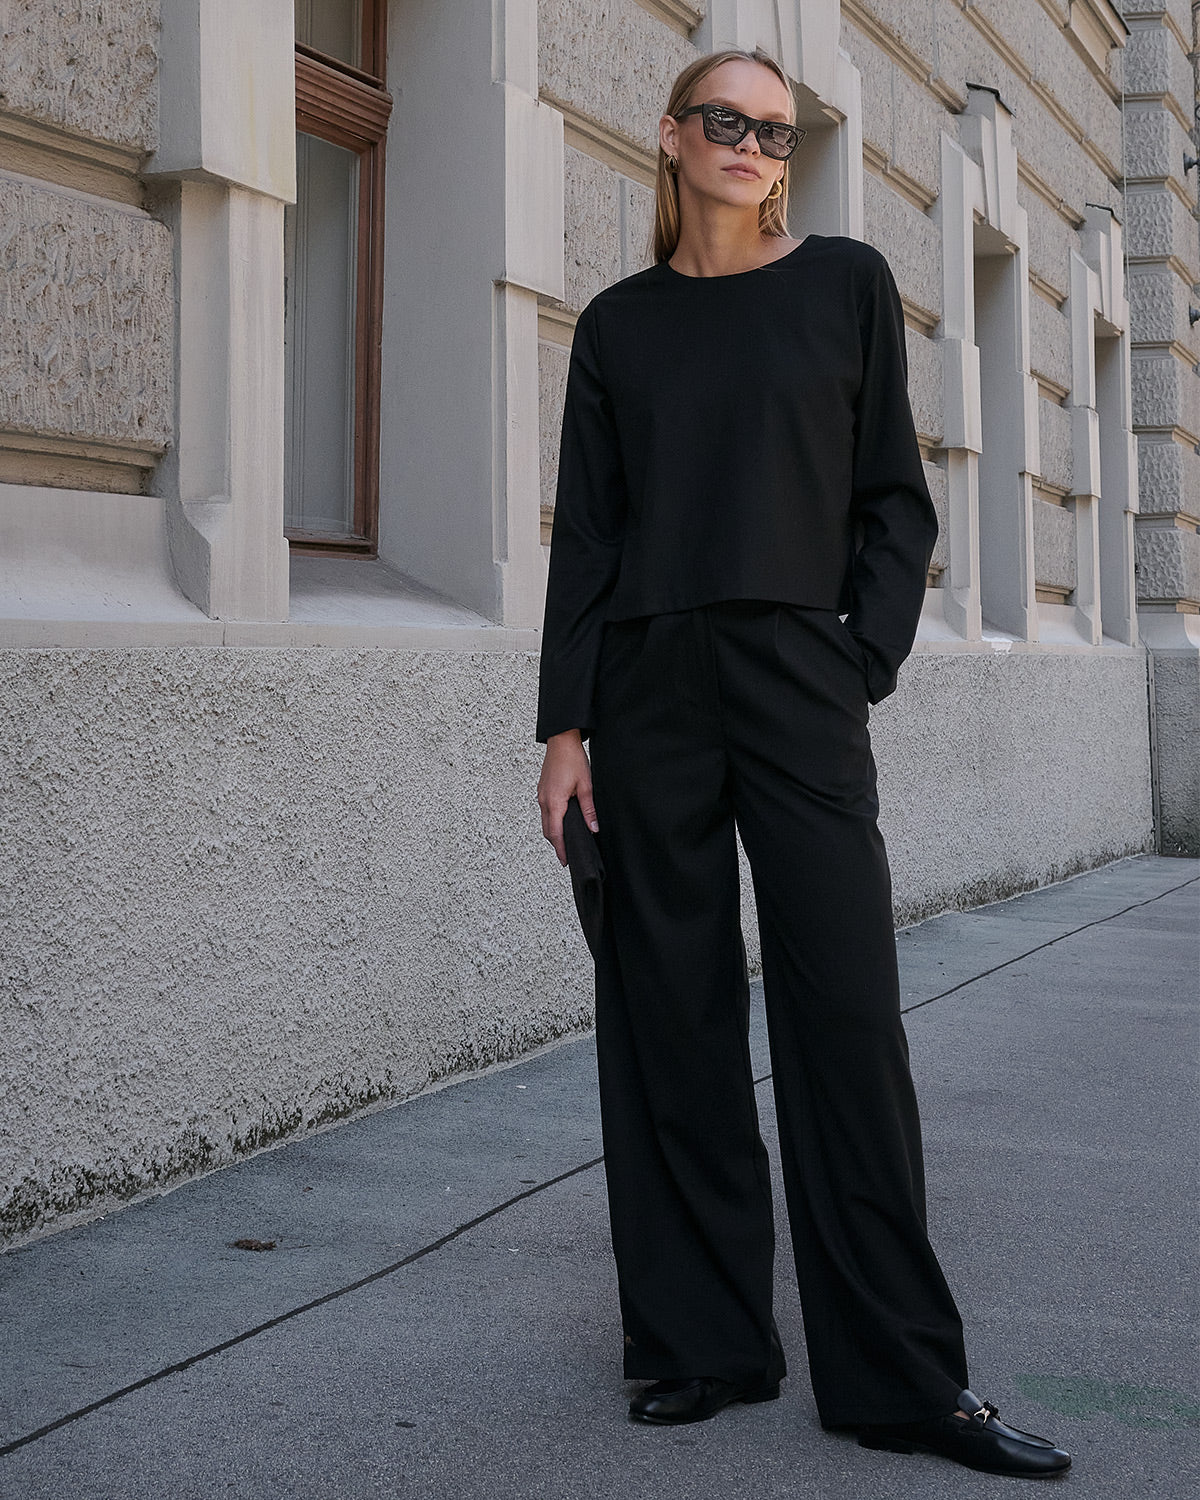 Mila.Vert Styling Tips: Smart Wide-Leg Trousers Styled for Autumn